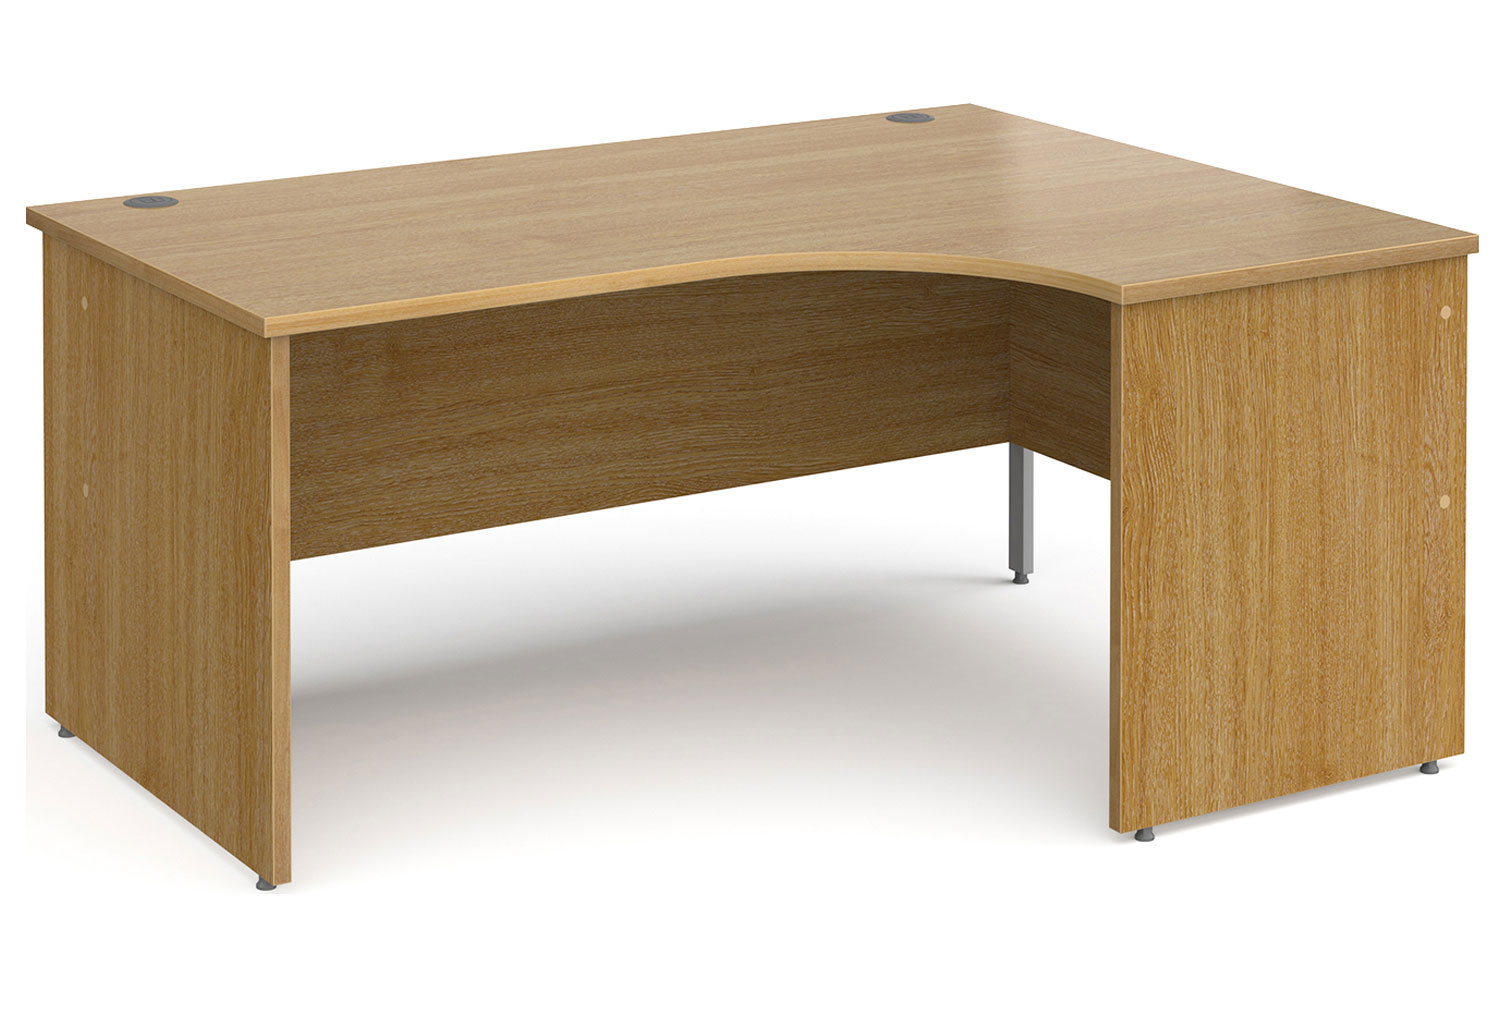 All Oak Panel End Right Hand Ergonomic Office Desk, 160wx120/80dx73h (cm), Express Delivery